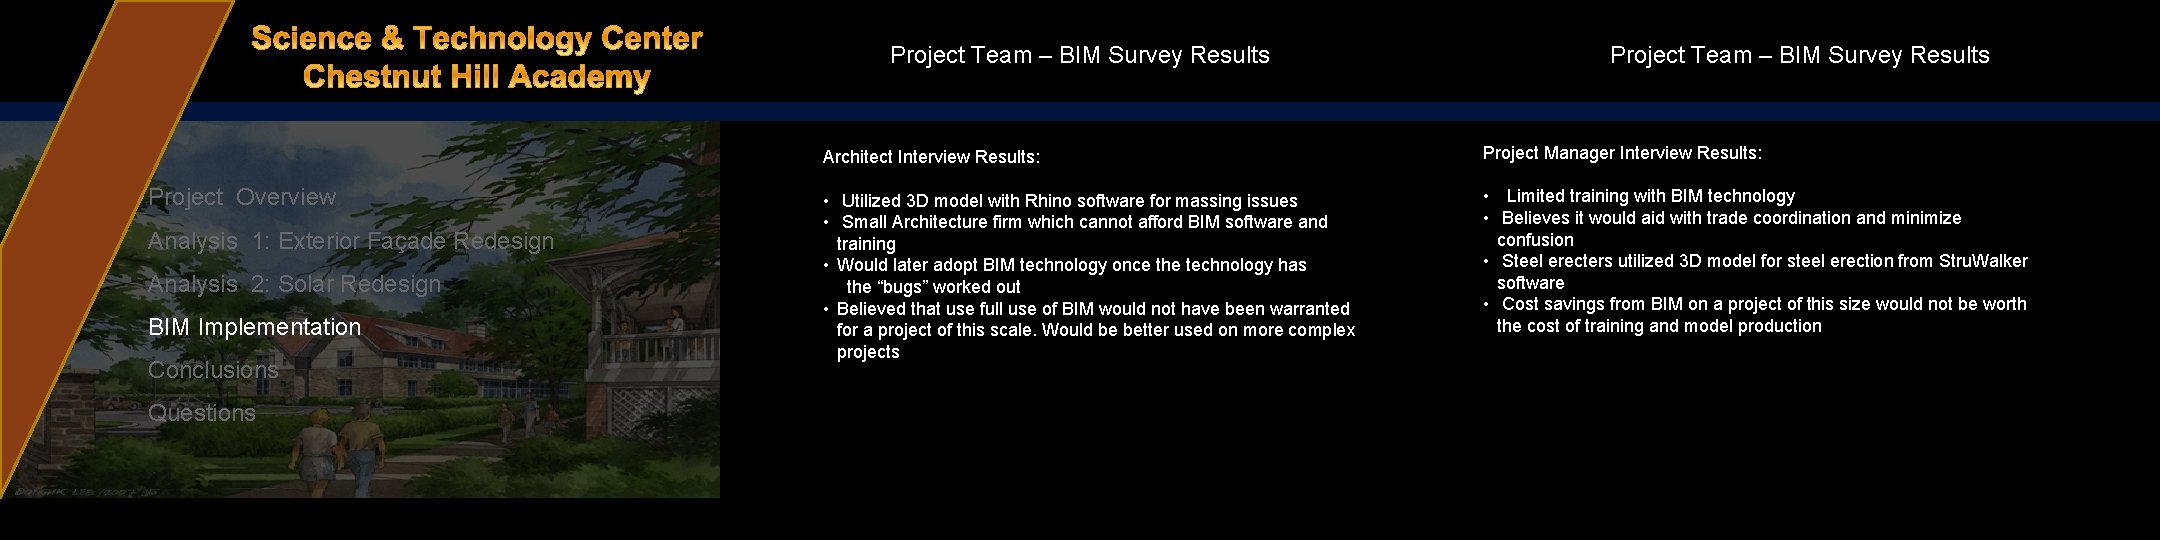 Project Team – BIM Survey Results Project Overview Analysis 1: Exterior Façade Redesign Analysis